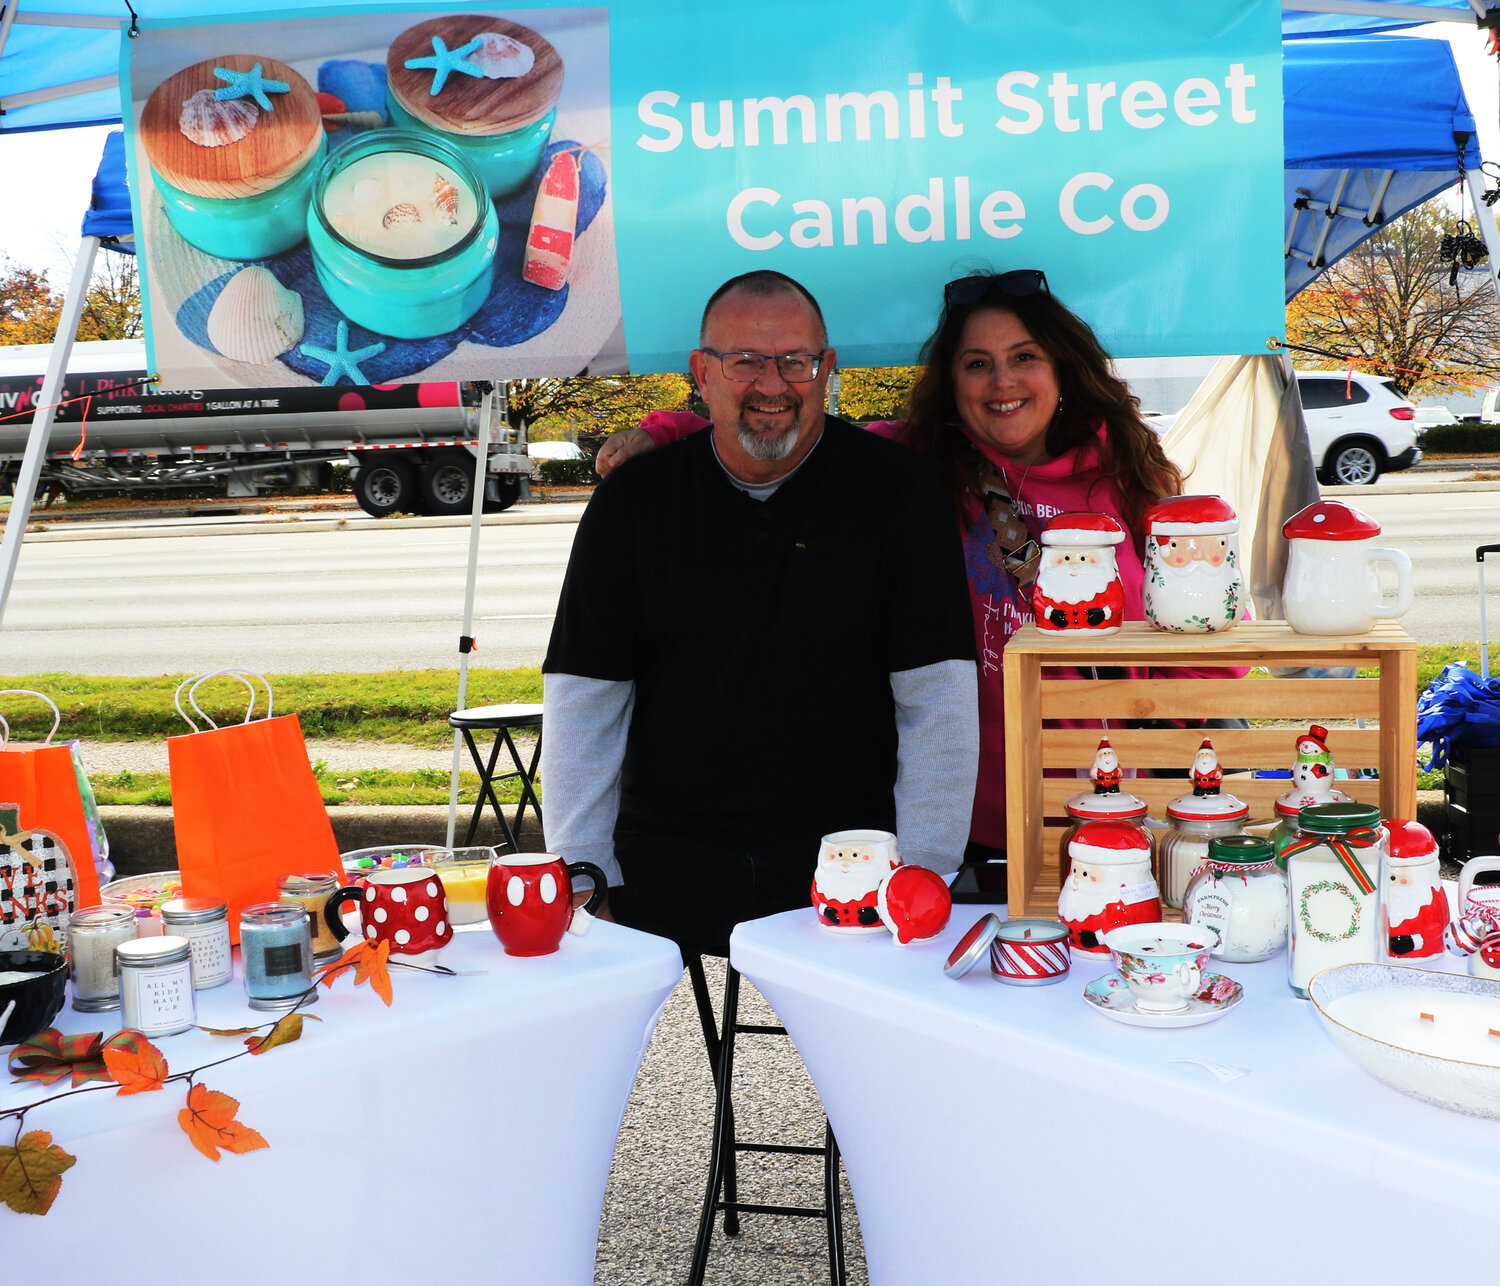 Michael and Regann Rusch from of Summit Street Candle Co. had many holiday and gift candles for sale.